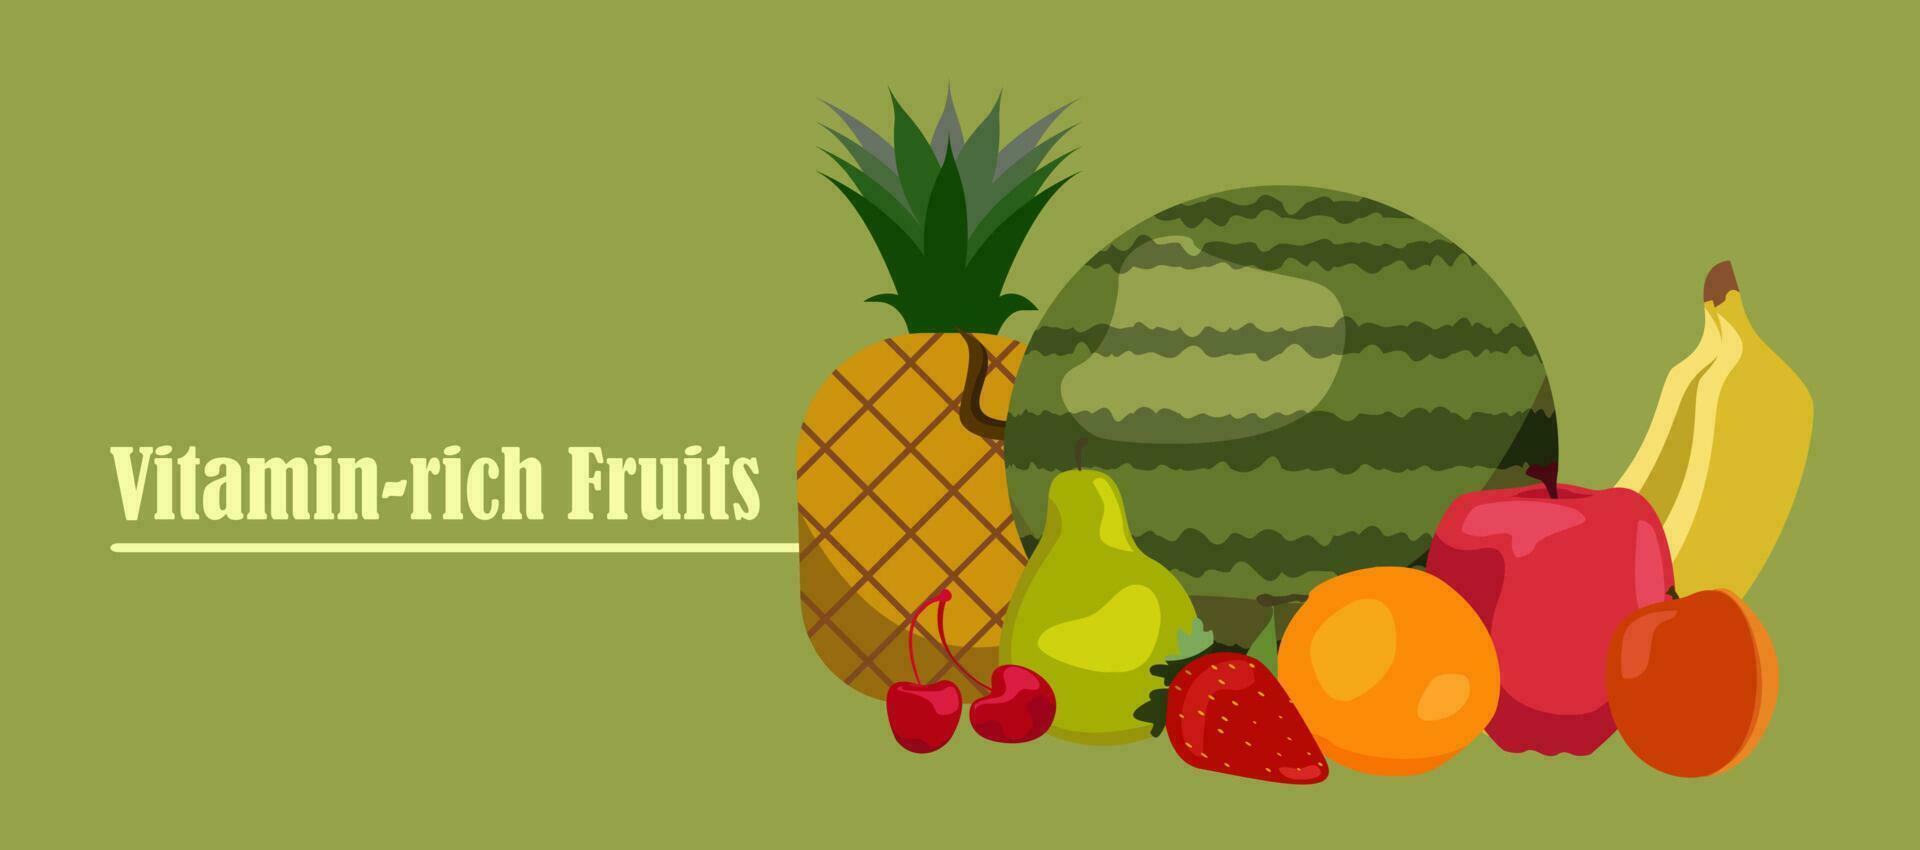 Fruit and berries vector banner set. Vegetarian Food Strawberries, banana and pomegranate Illustation of fruit Pineapple or Apple. Orange, Watermelon apricot, pear, cherry.